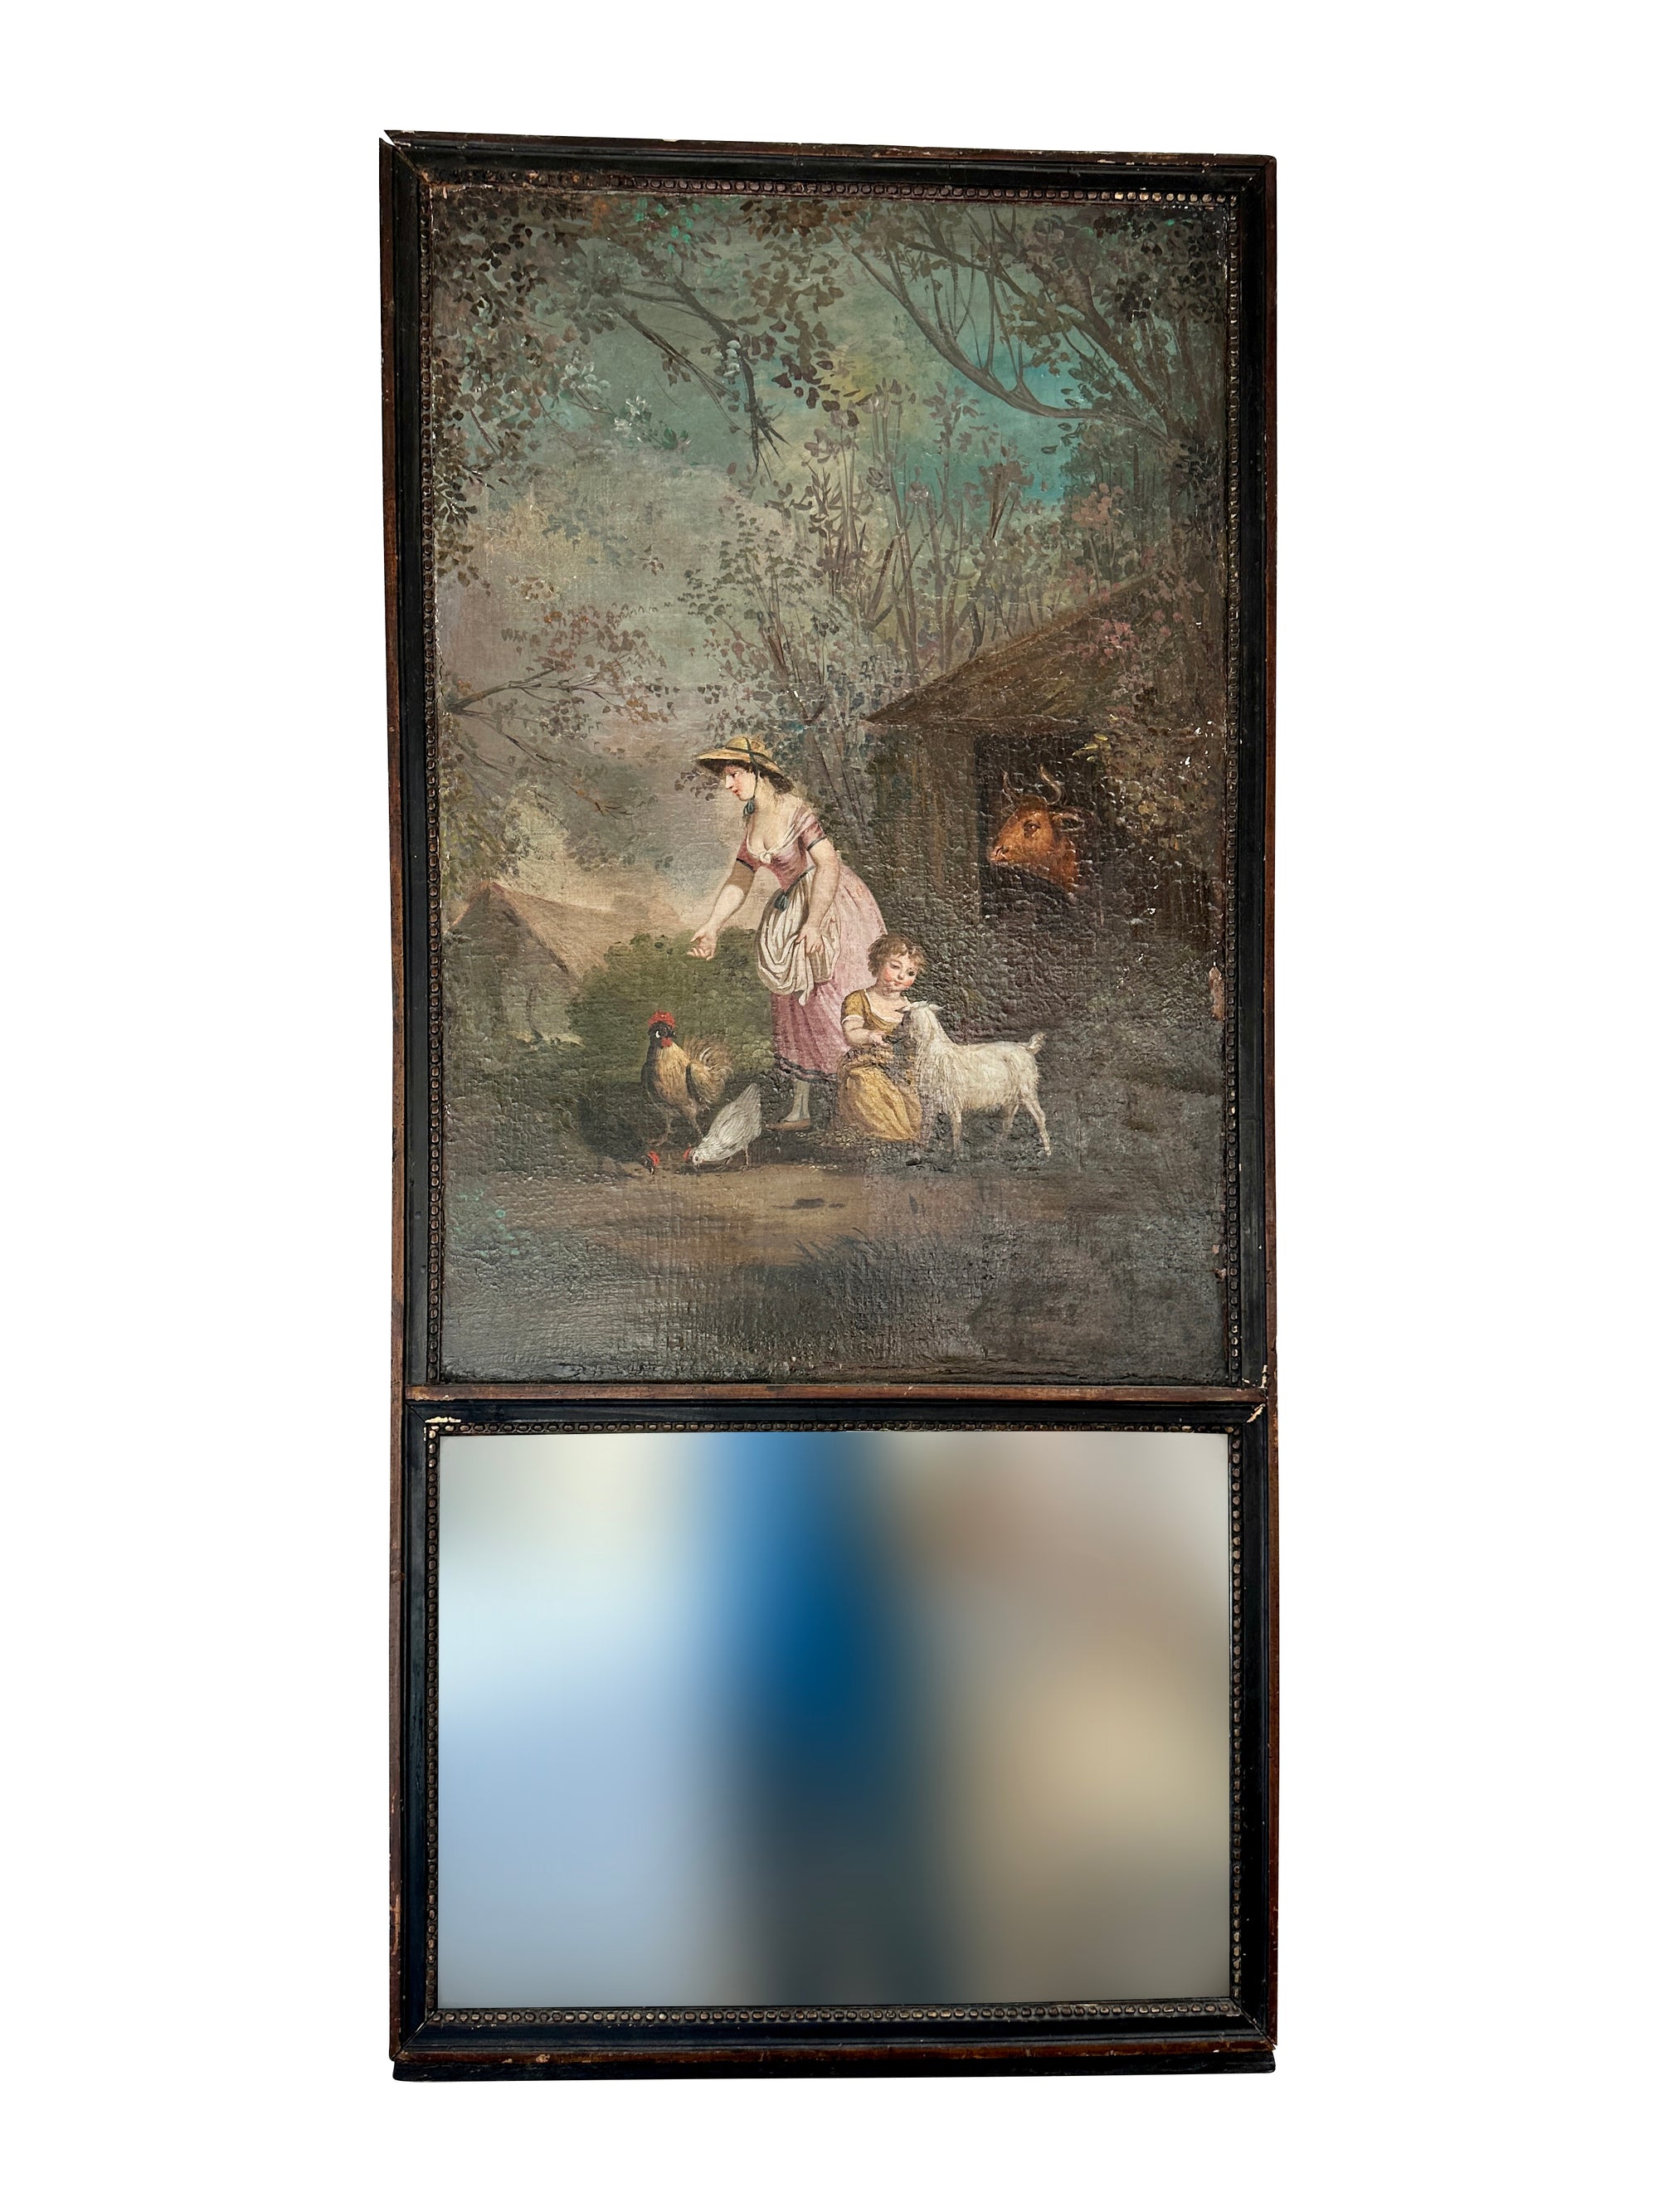 French Trumeau Mirror with Pastoral Scene, c. 1790